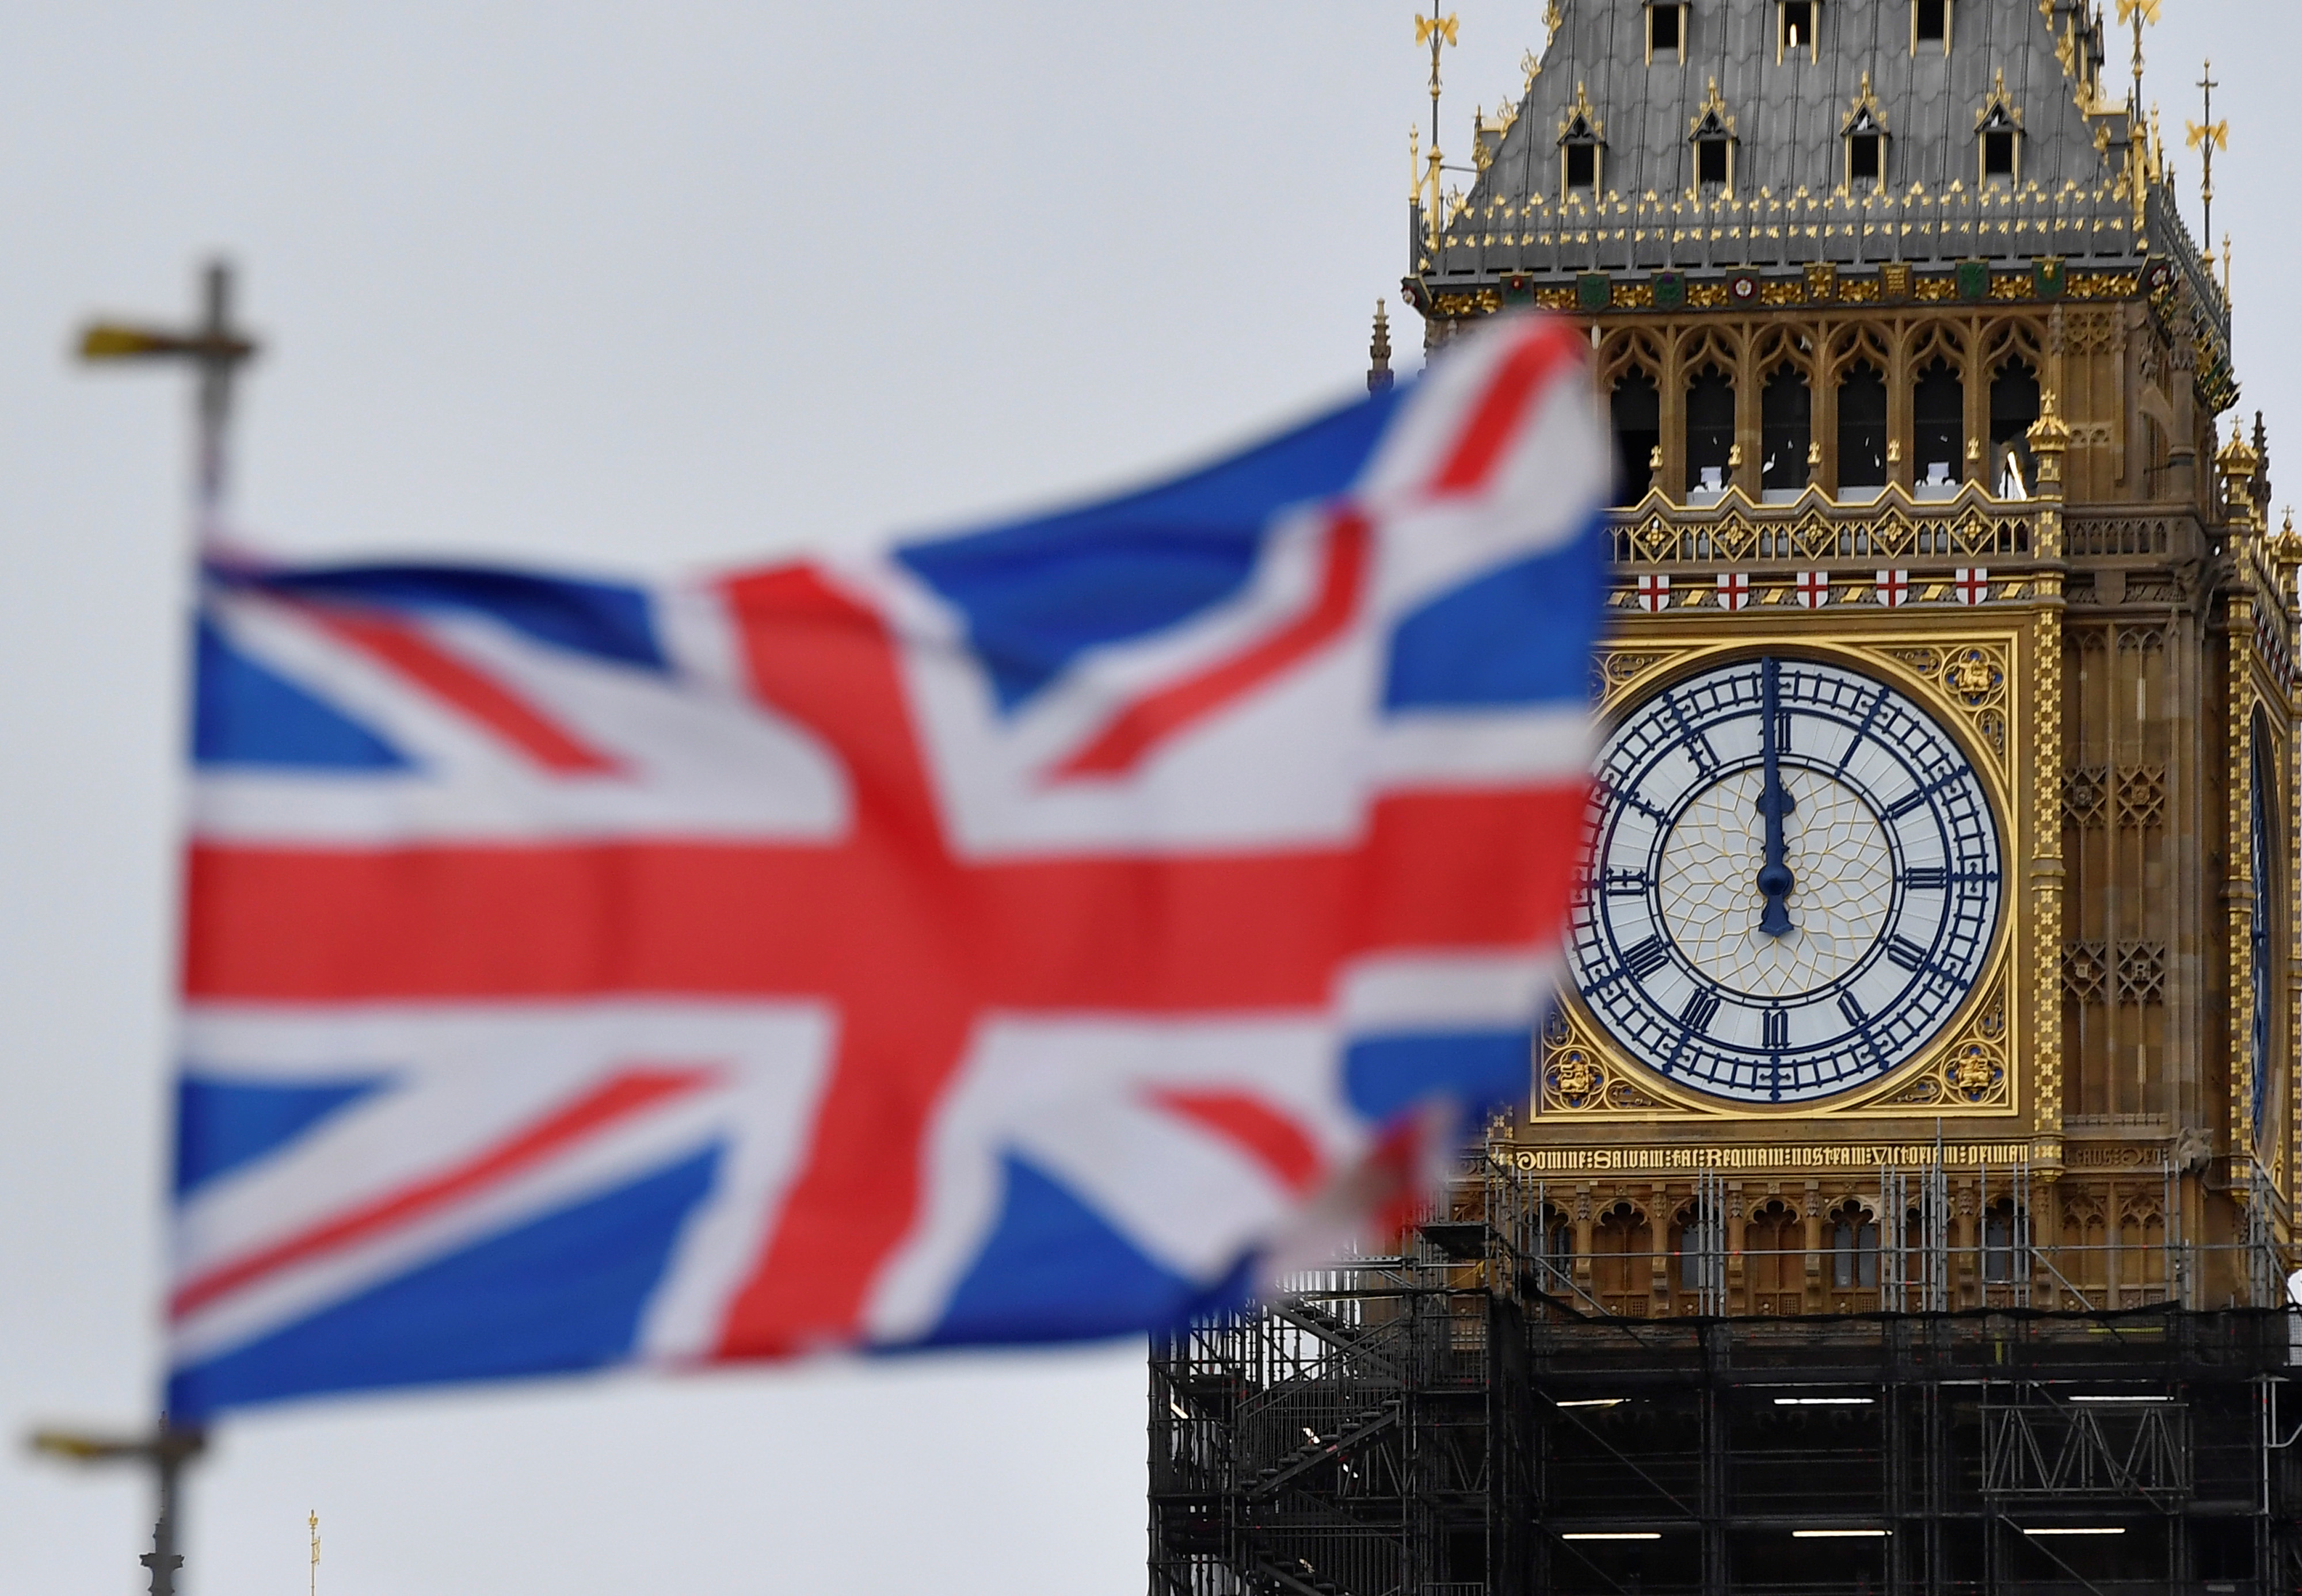 A clock face is seen on the Elizabeth Tower, ahead of New Year's Eve events when all four faces will be visible for the first time to ring in the new year since restoration works commenced at Houses of Parliament in London